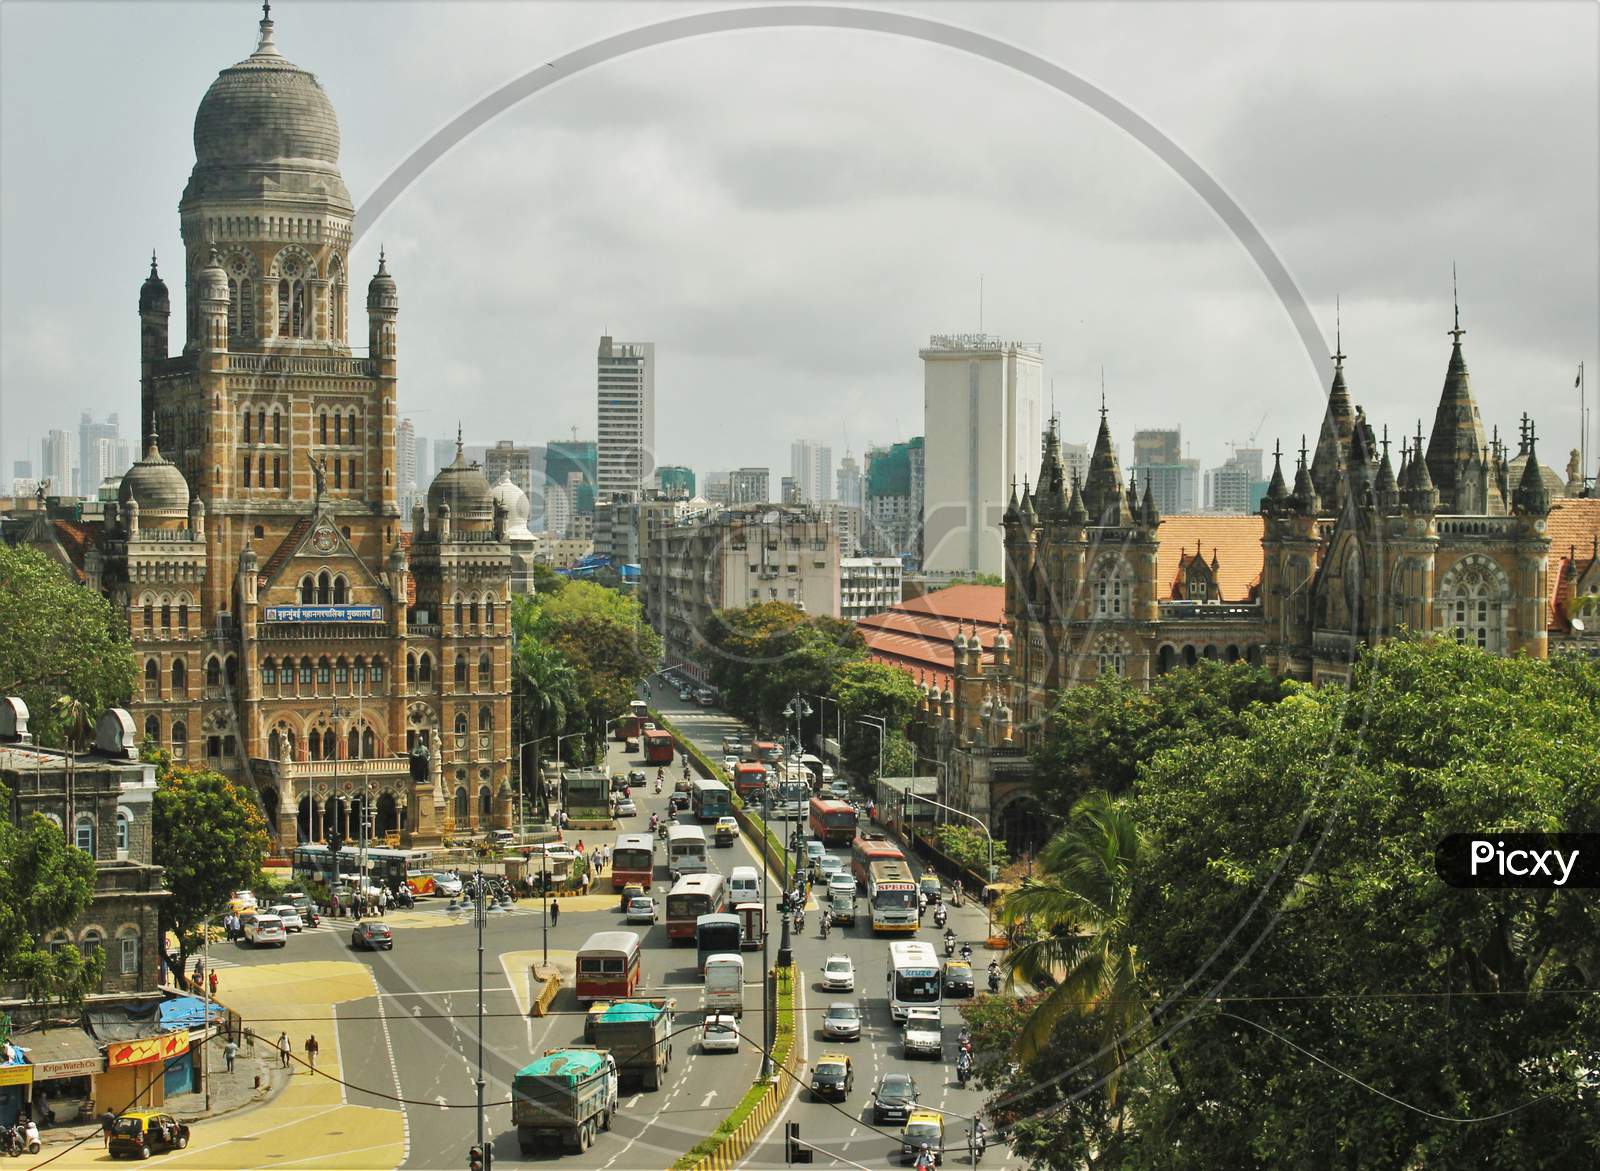 A general view of traffic at the Chhatrapati Shivaji Maharaj Terminus(CSMT)-Brihanmumbai Municipal Corporation (BMC) intersection after some of the restrictions were lifted during a nationwide lockdown, in Mumbai, India on June 9, 2020.